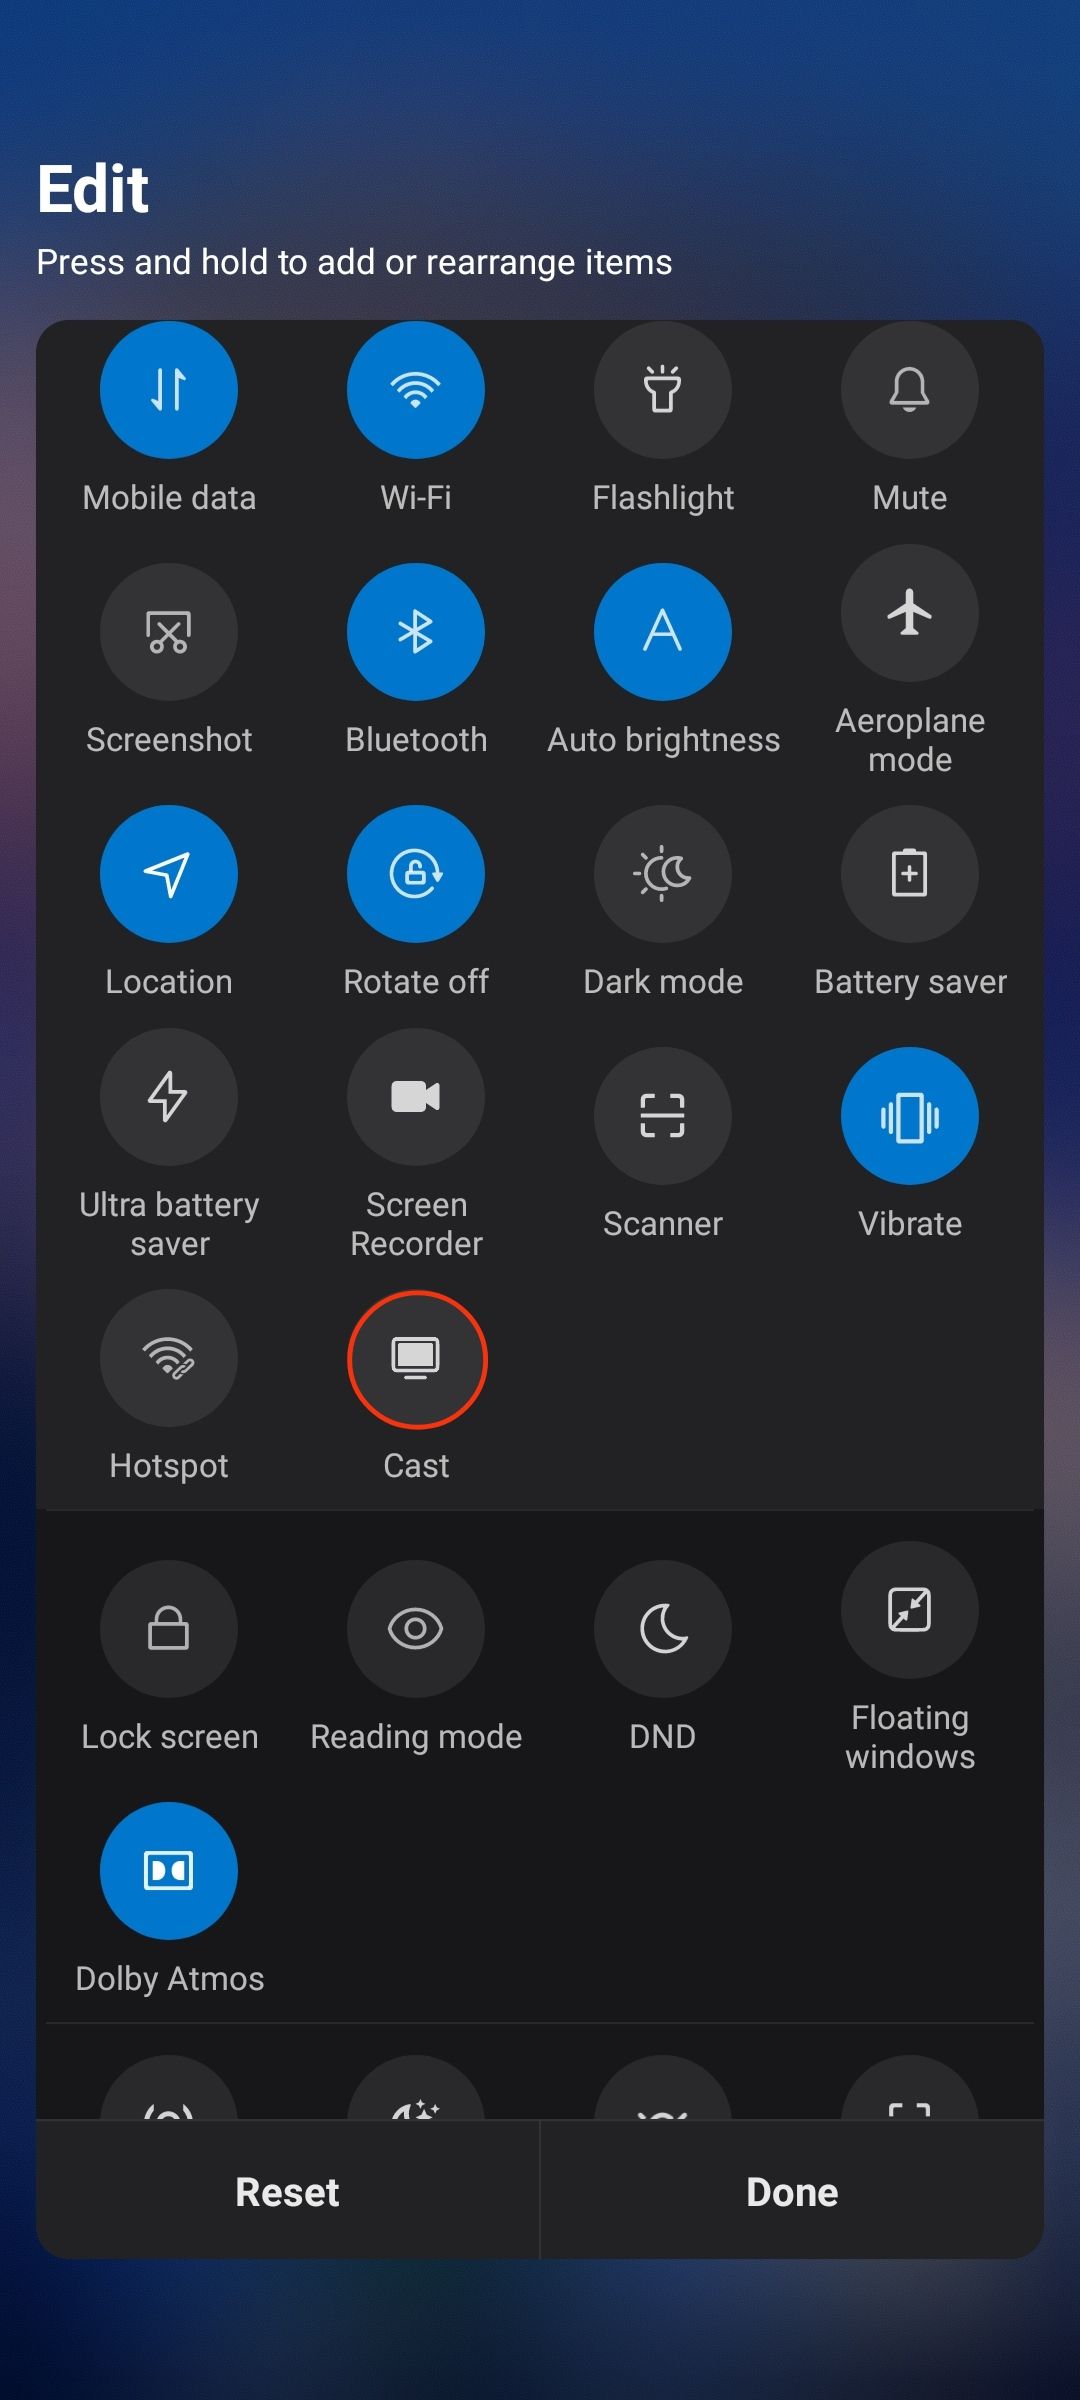 Mirror Phone to TV: How to Connect Android or iOS Mobile to TV